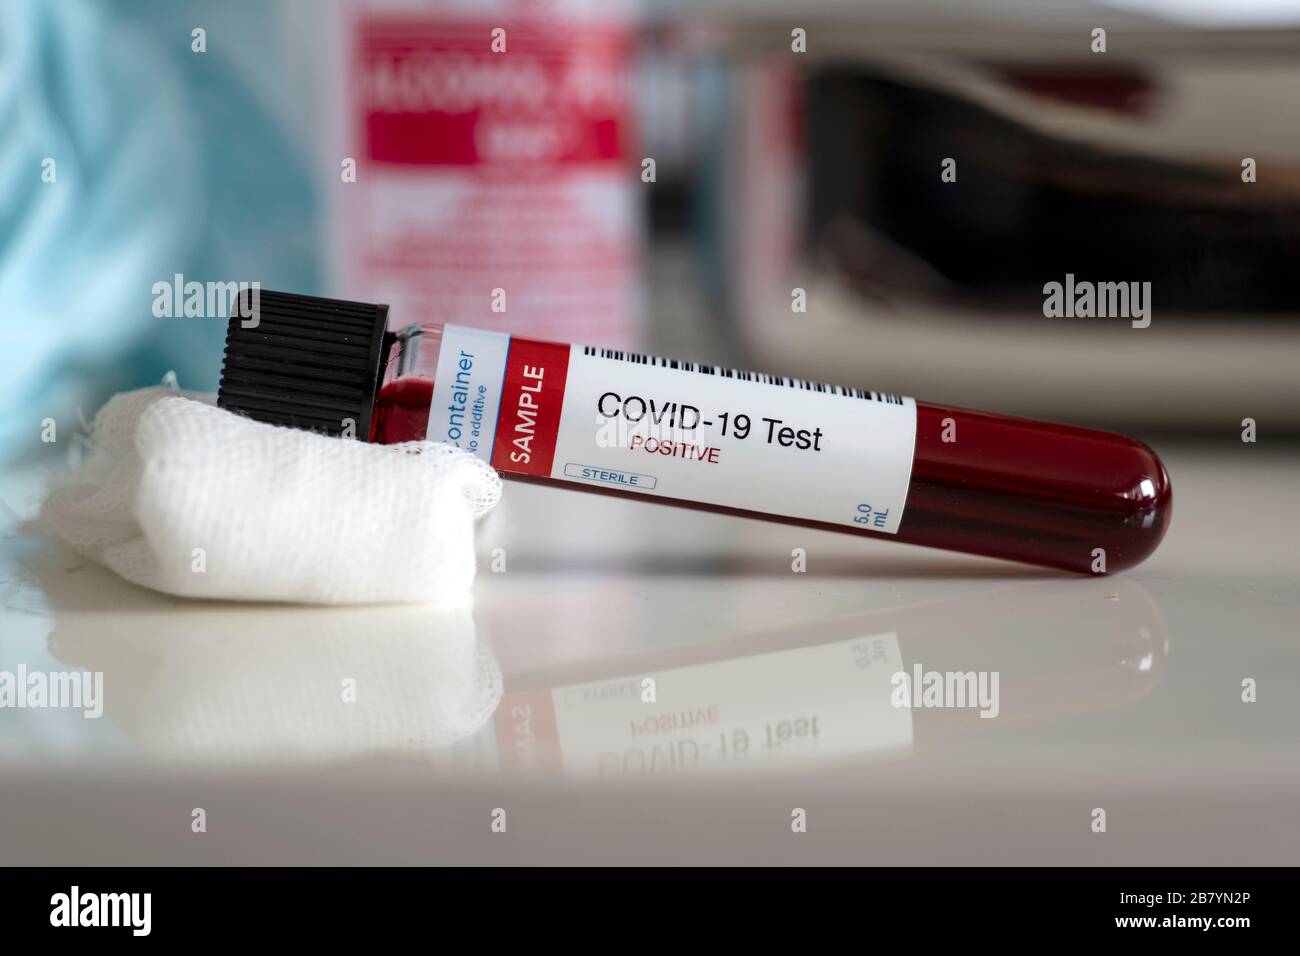 Testing for presence of coronavirus. Tube containing a blood sample that has tested positive for COVID-19 Stock Photo